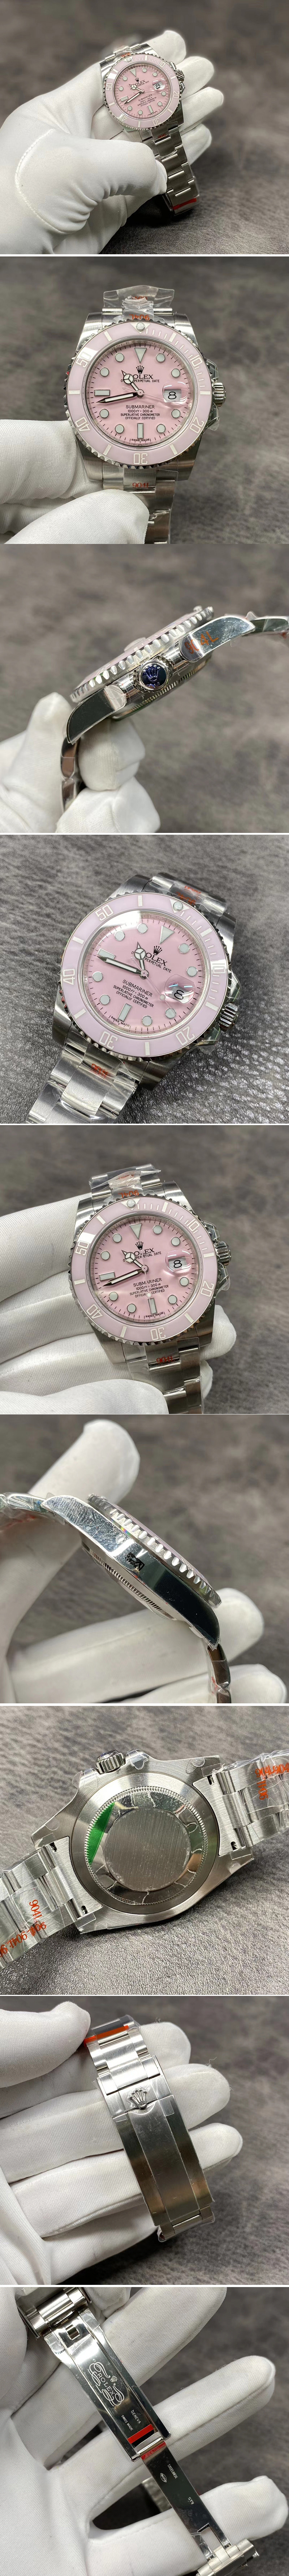 Replica Rolex Submariner 116610 GMF Best Edtion Pink Dial A2836